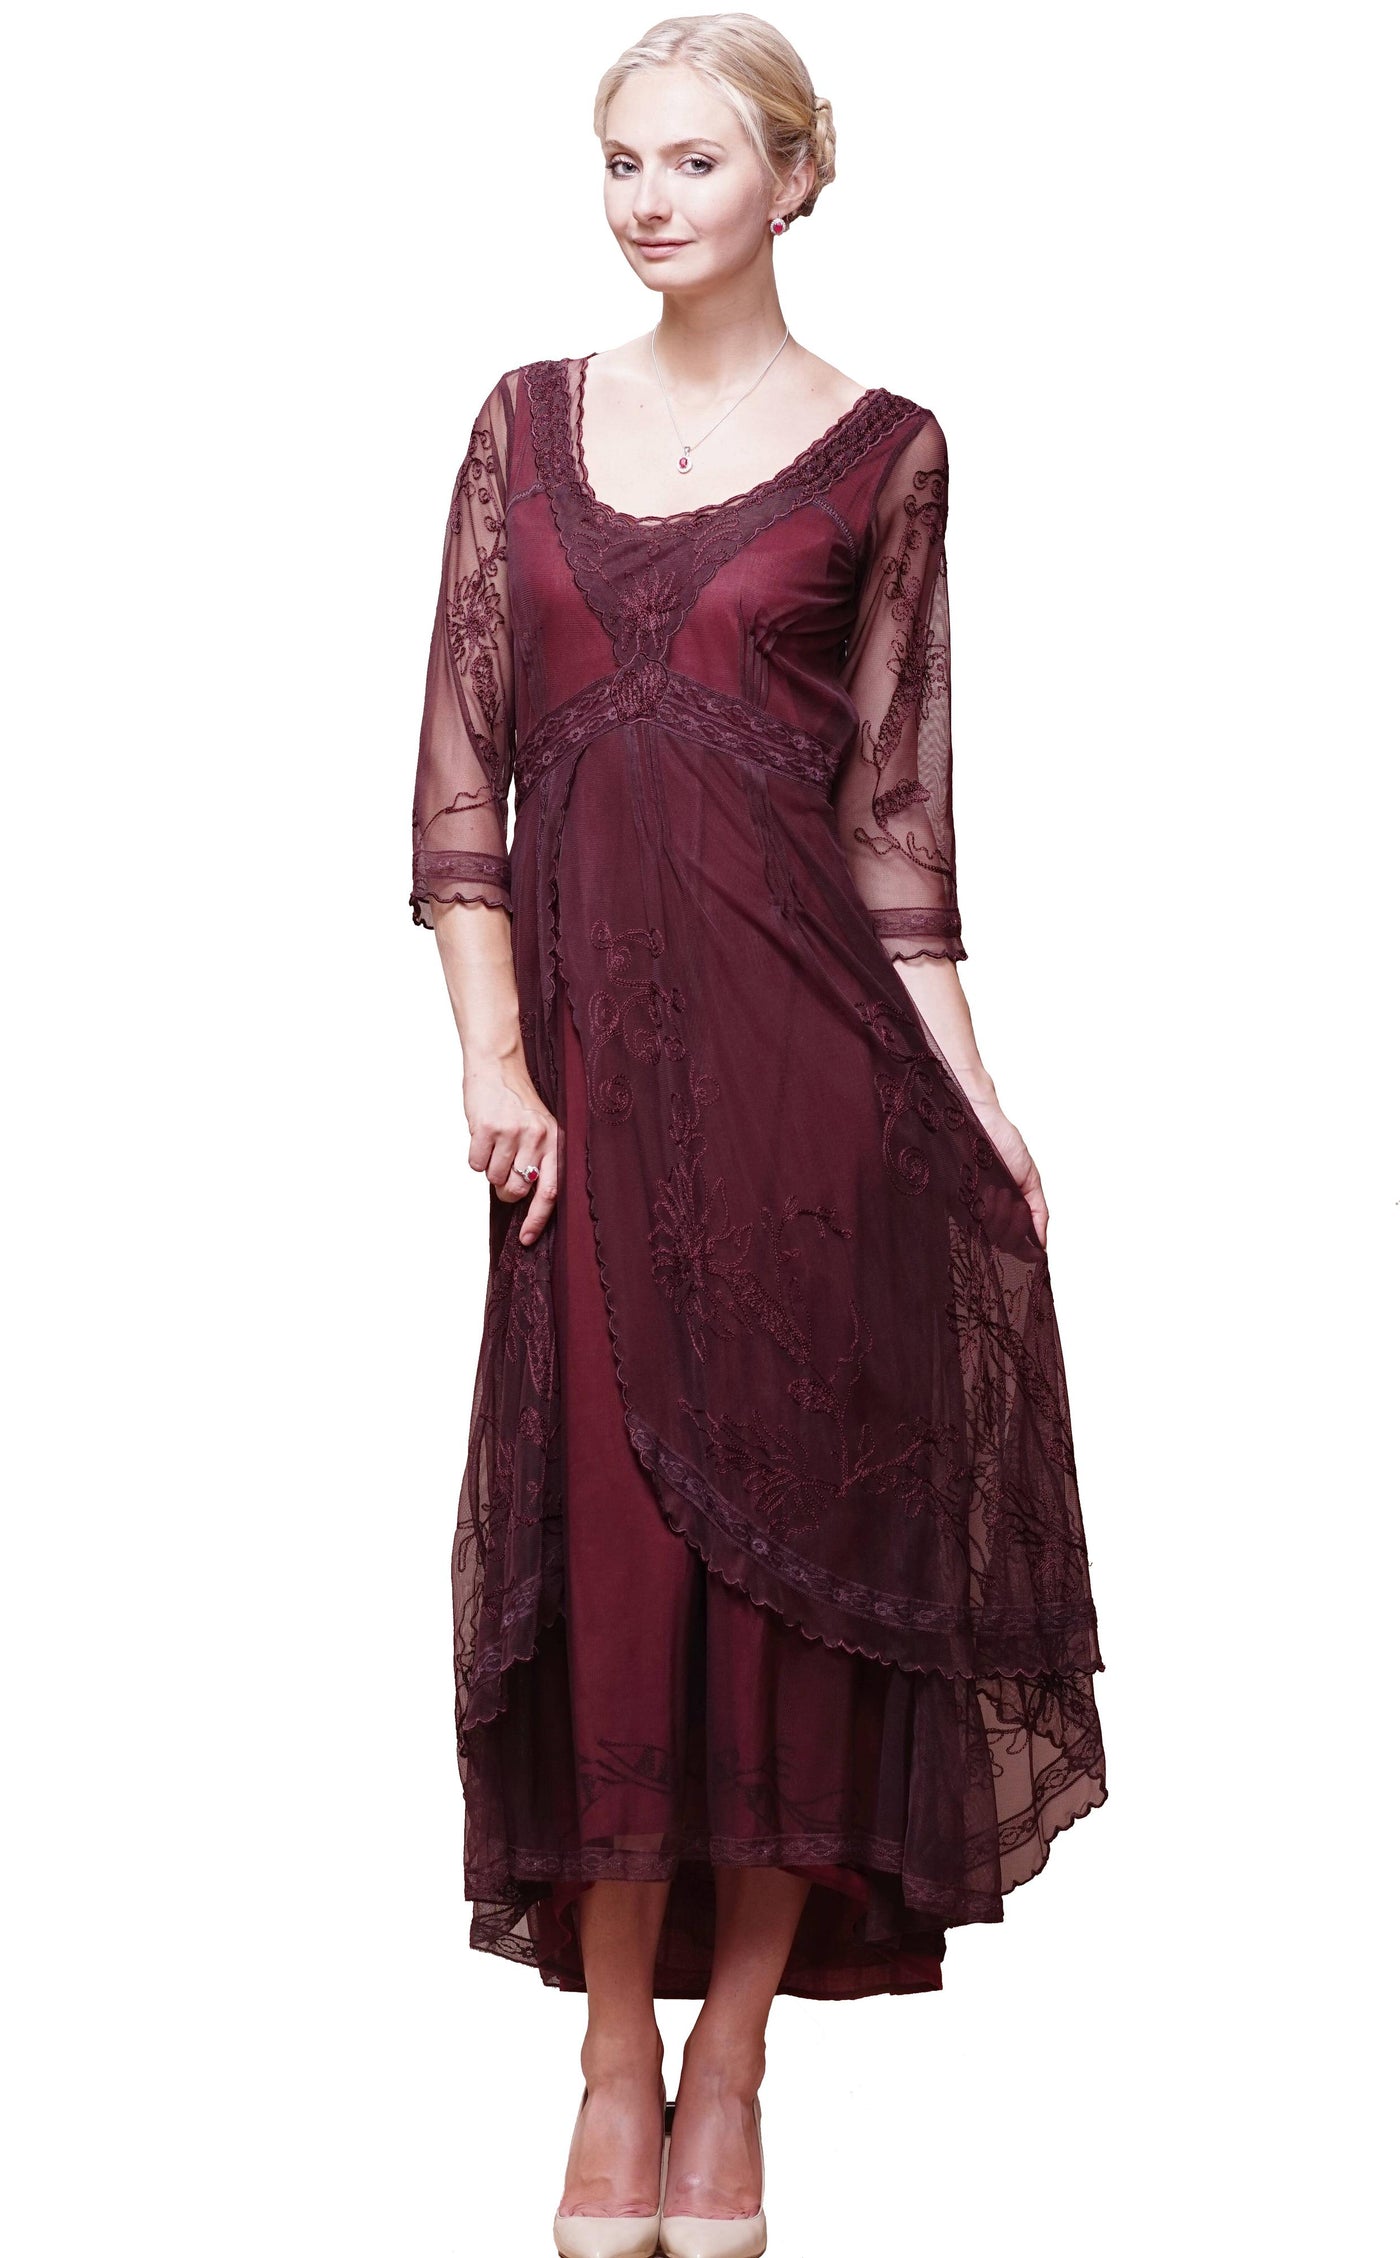 Downton Abbey Tea Party Gown 40163 in Ruby by Nataya